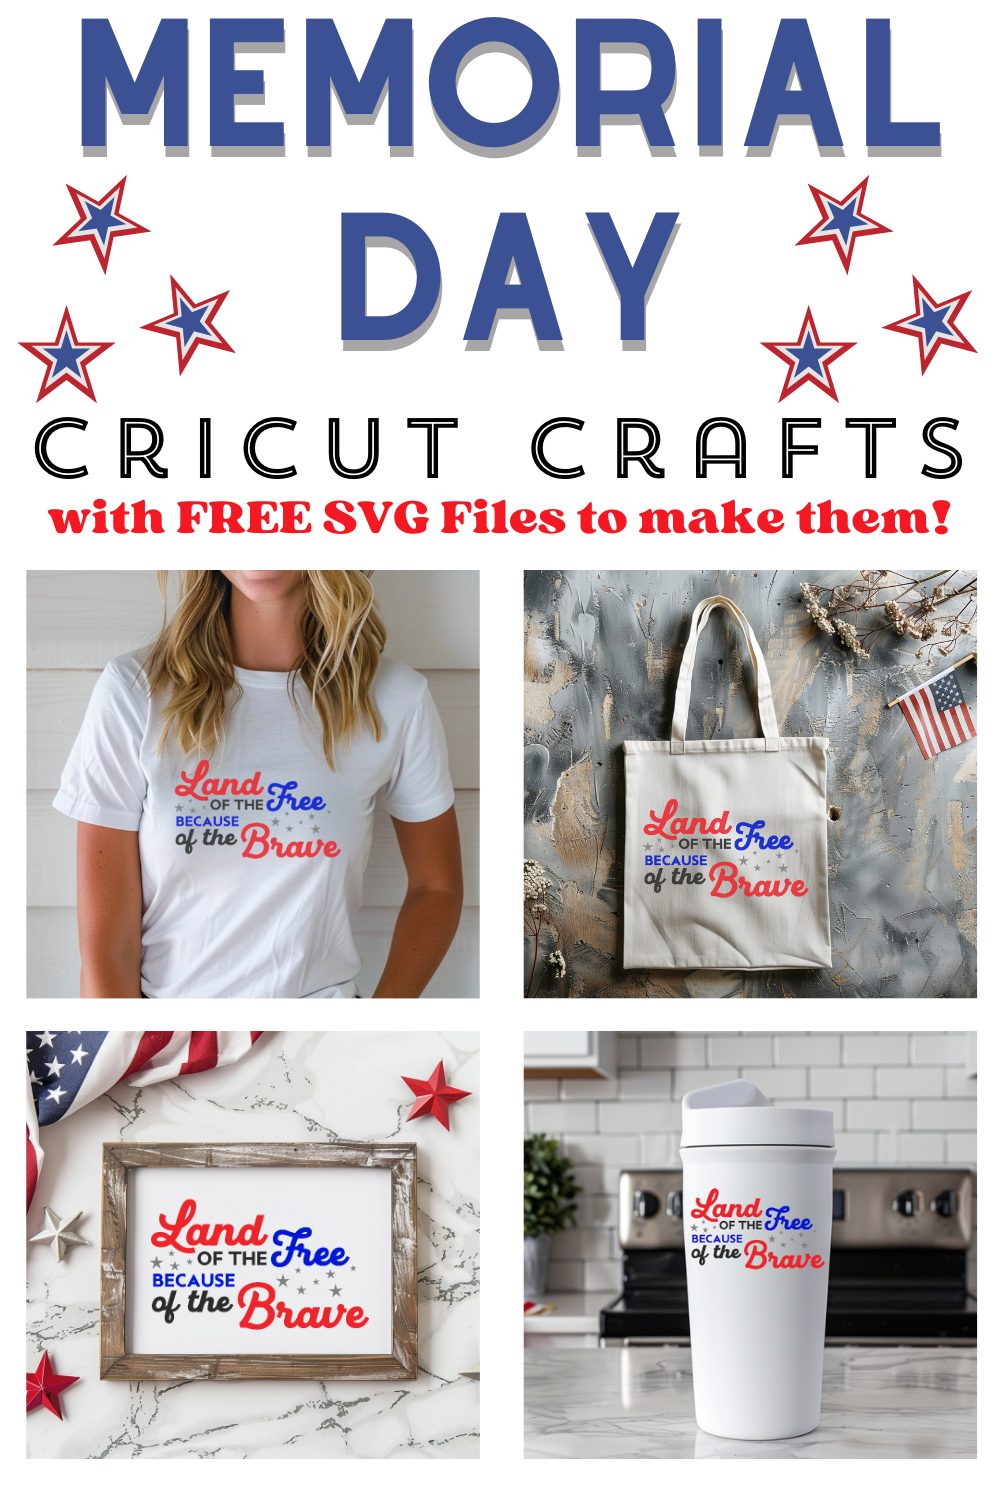 Memorial Day Cricut Crafts with Free SVGs